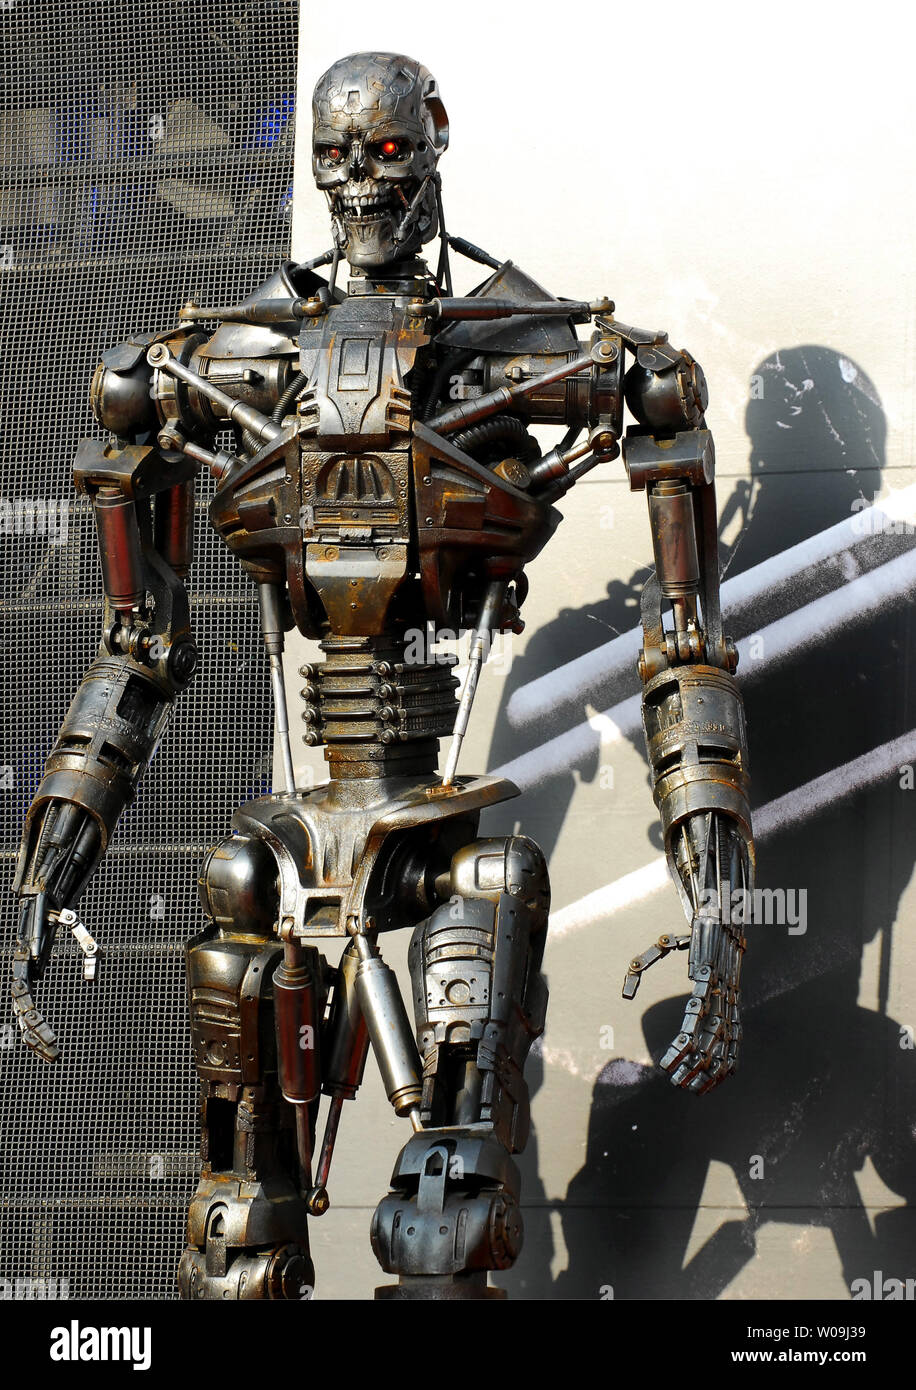 The T-800 is displayed on the stage during the Japanese premiere